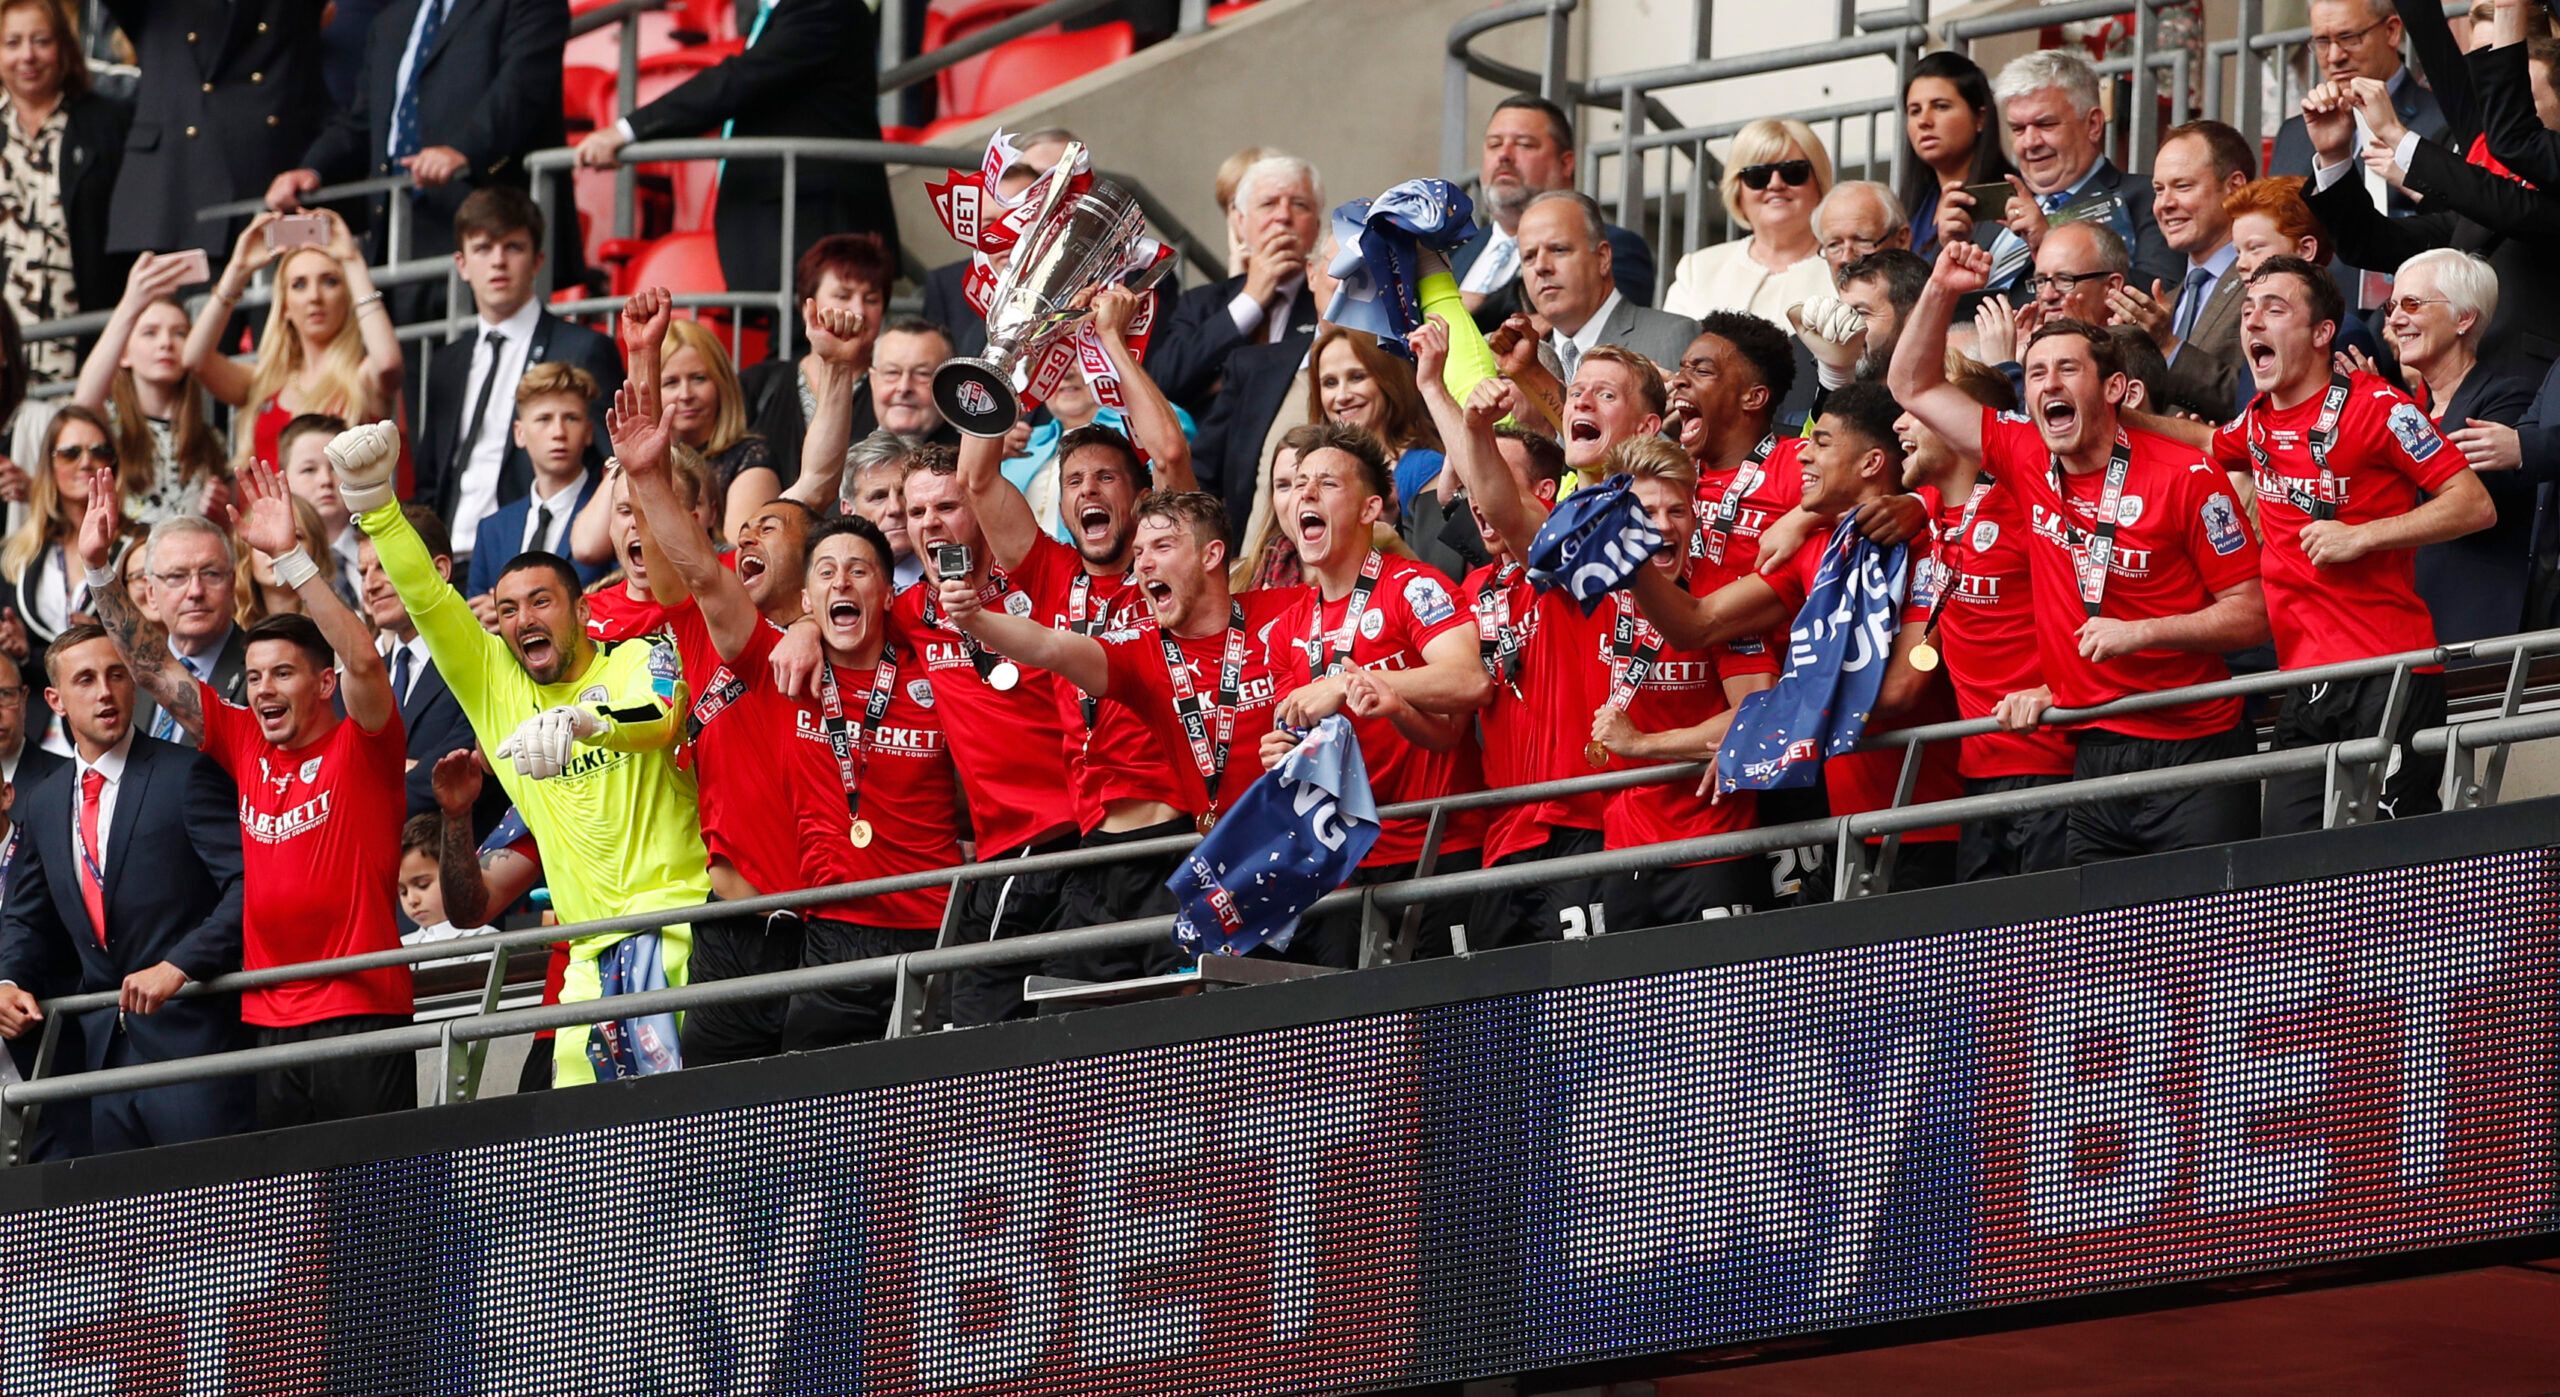 Britain Soccer Football - Barnsley v Millwall - Sky Bet Football League One Play-Off Final - Wembley Stadium - 29/5/16 
Barnsley celebrate with the trophy after winning the Sky Bet Football League One Play-Off Final 
Mandatory Credit: Action Images / John Sibley 
Livepic 
EDITORIAL USE ONLY. No use with unauthorized audio, video, data, fixture lists, club/league logos or 